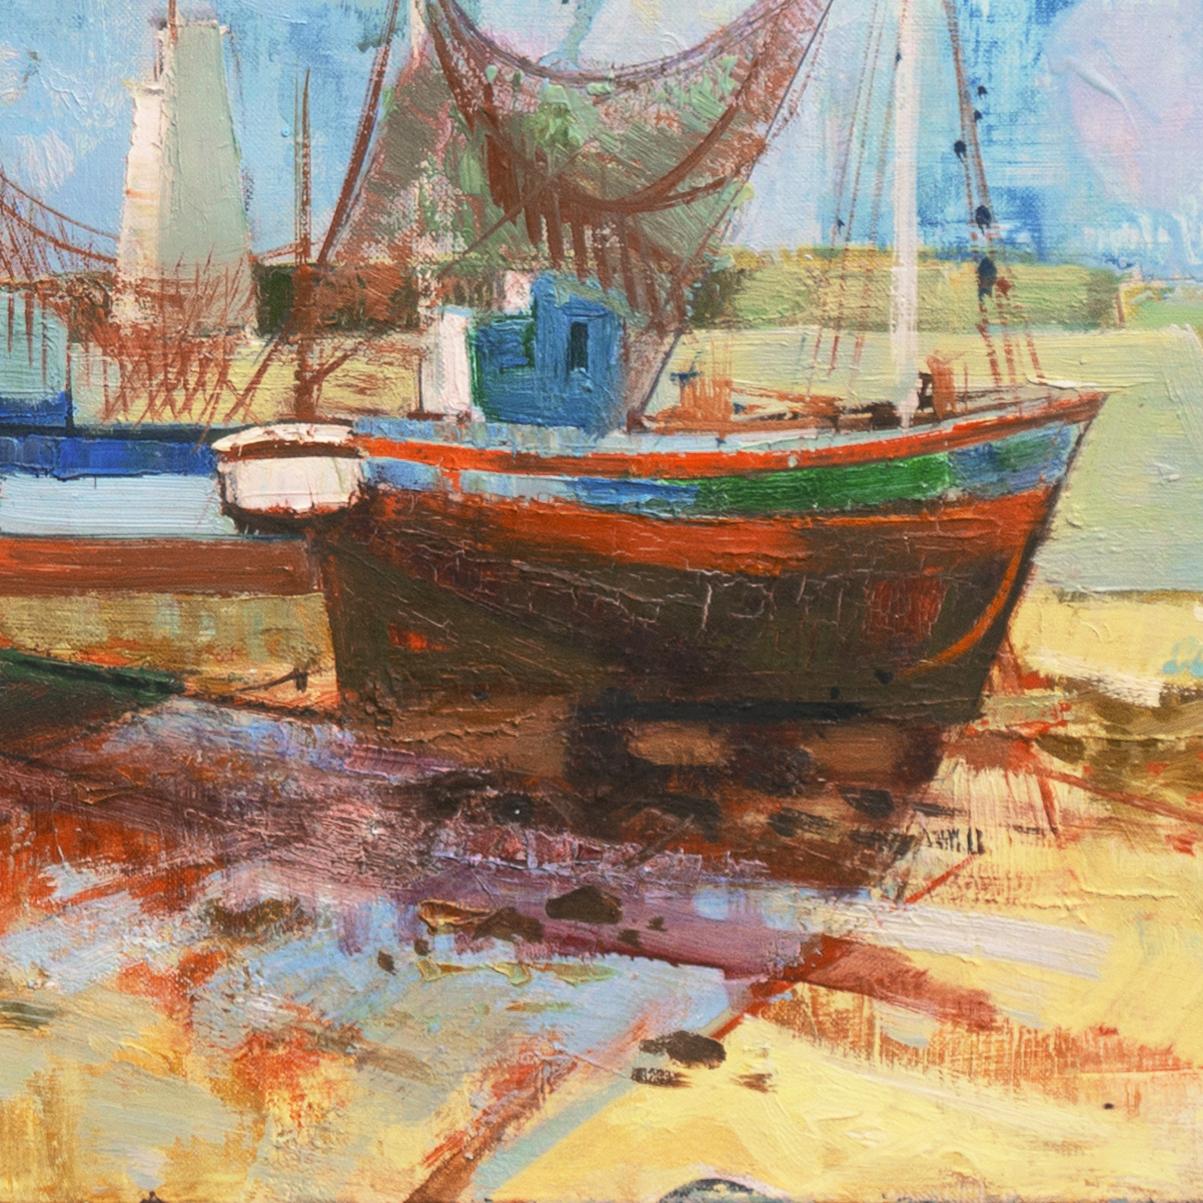 'Fishing Boats, Brittany', French Coast, School of Paris, Post-Impressionist Oil - Beige Landscape Painting by J.M.Hubert